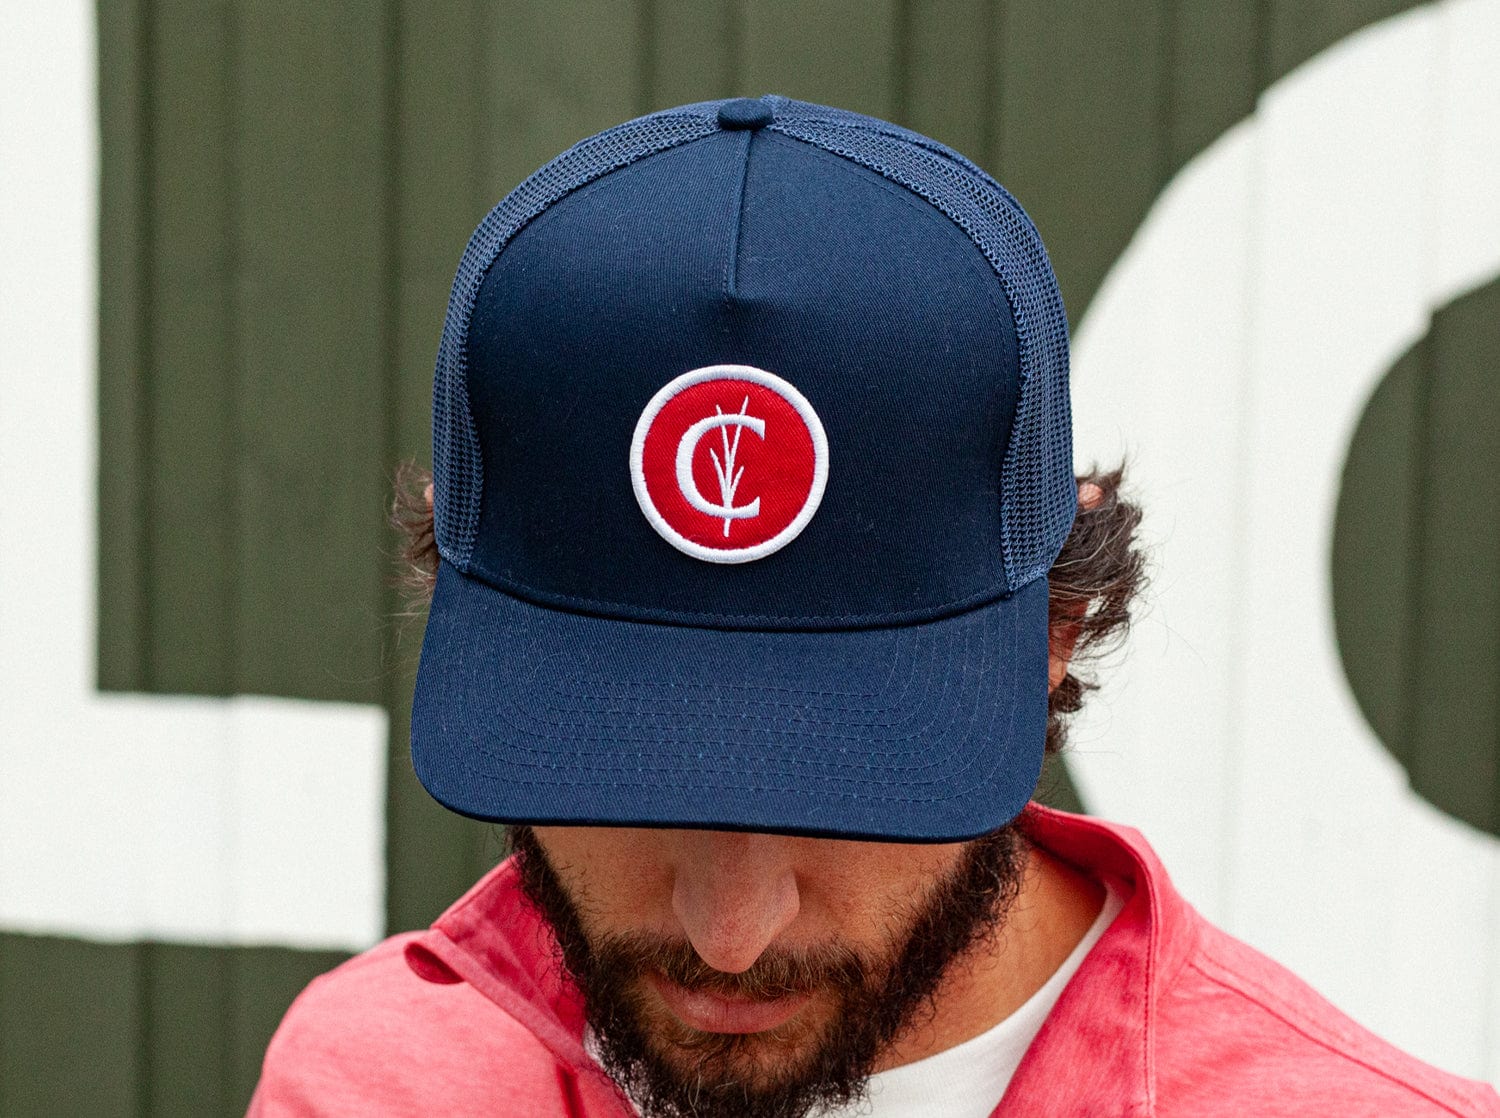 Classic Trucker Hat - Red Grassy C Patch - Navy